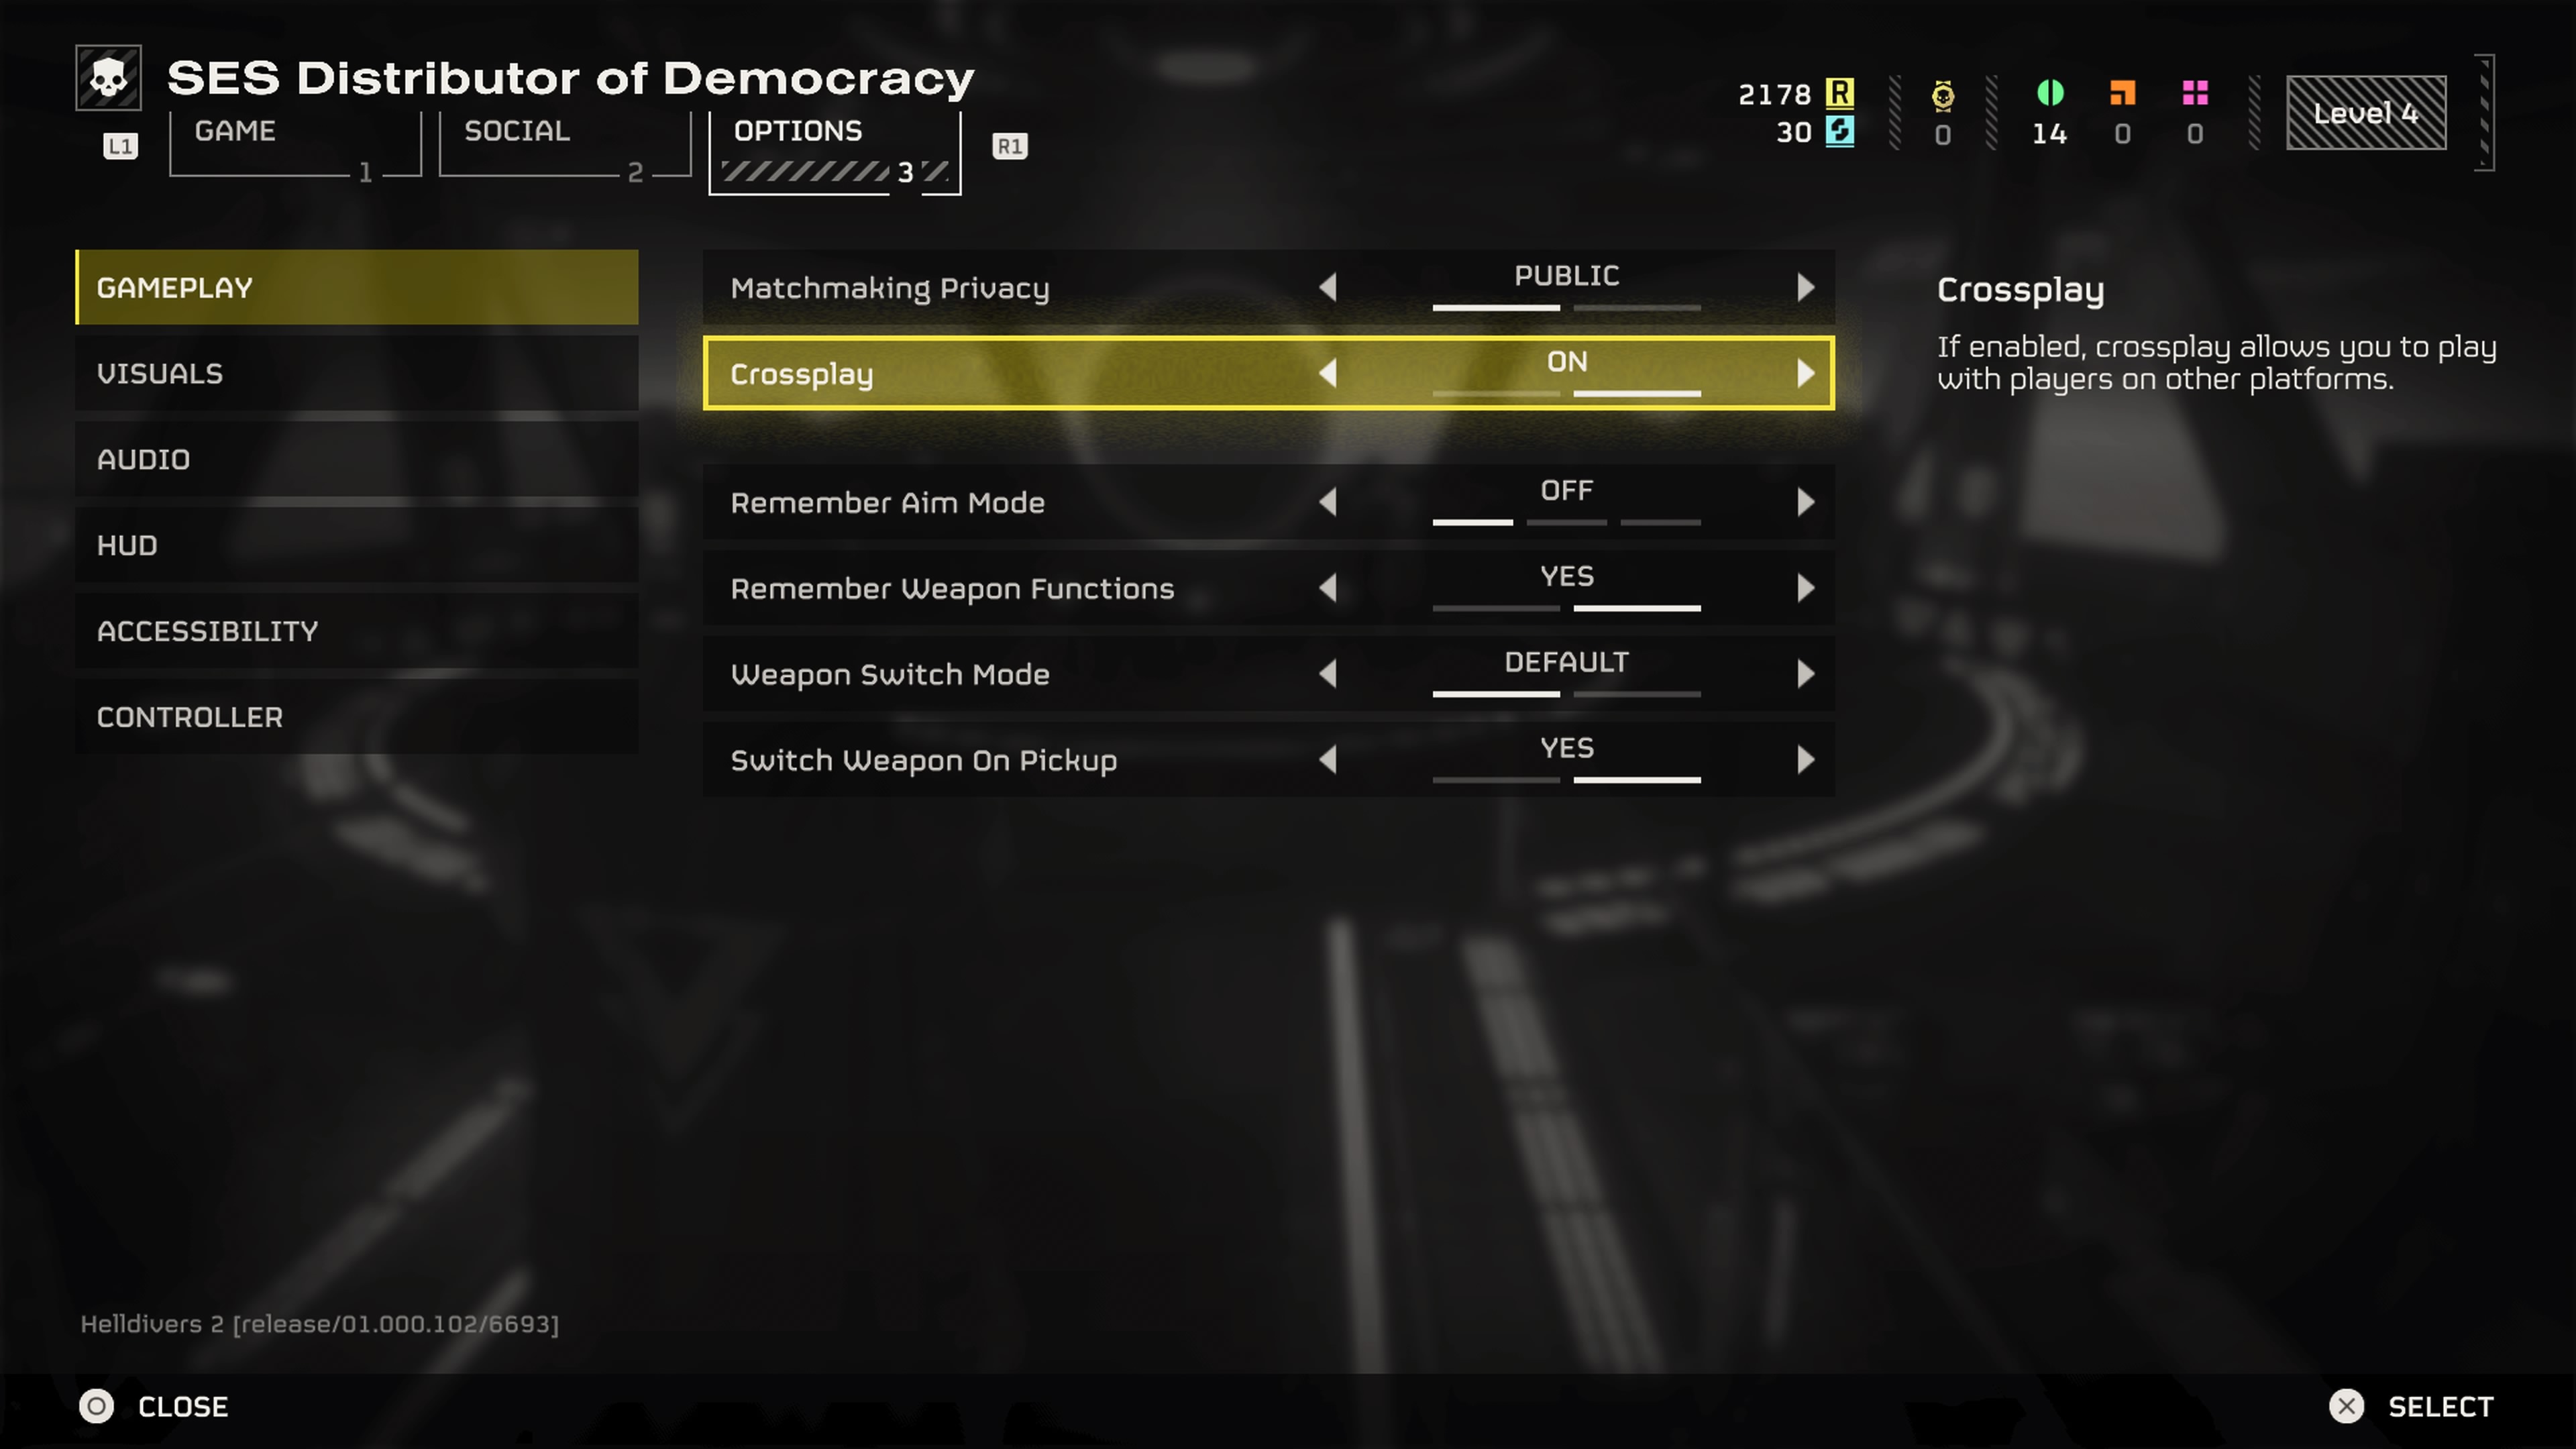 Helldivers 2 Options menu with the Crossplay option highlighted and set to "On".